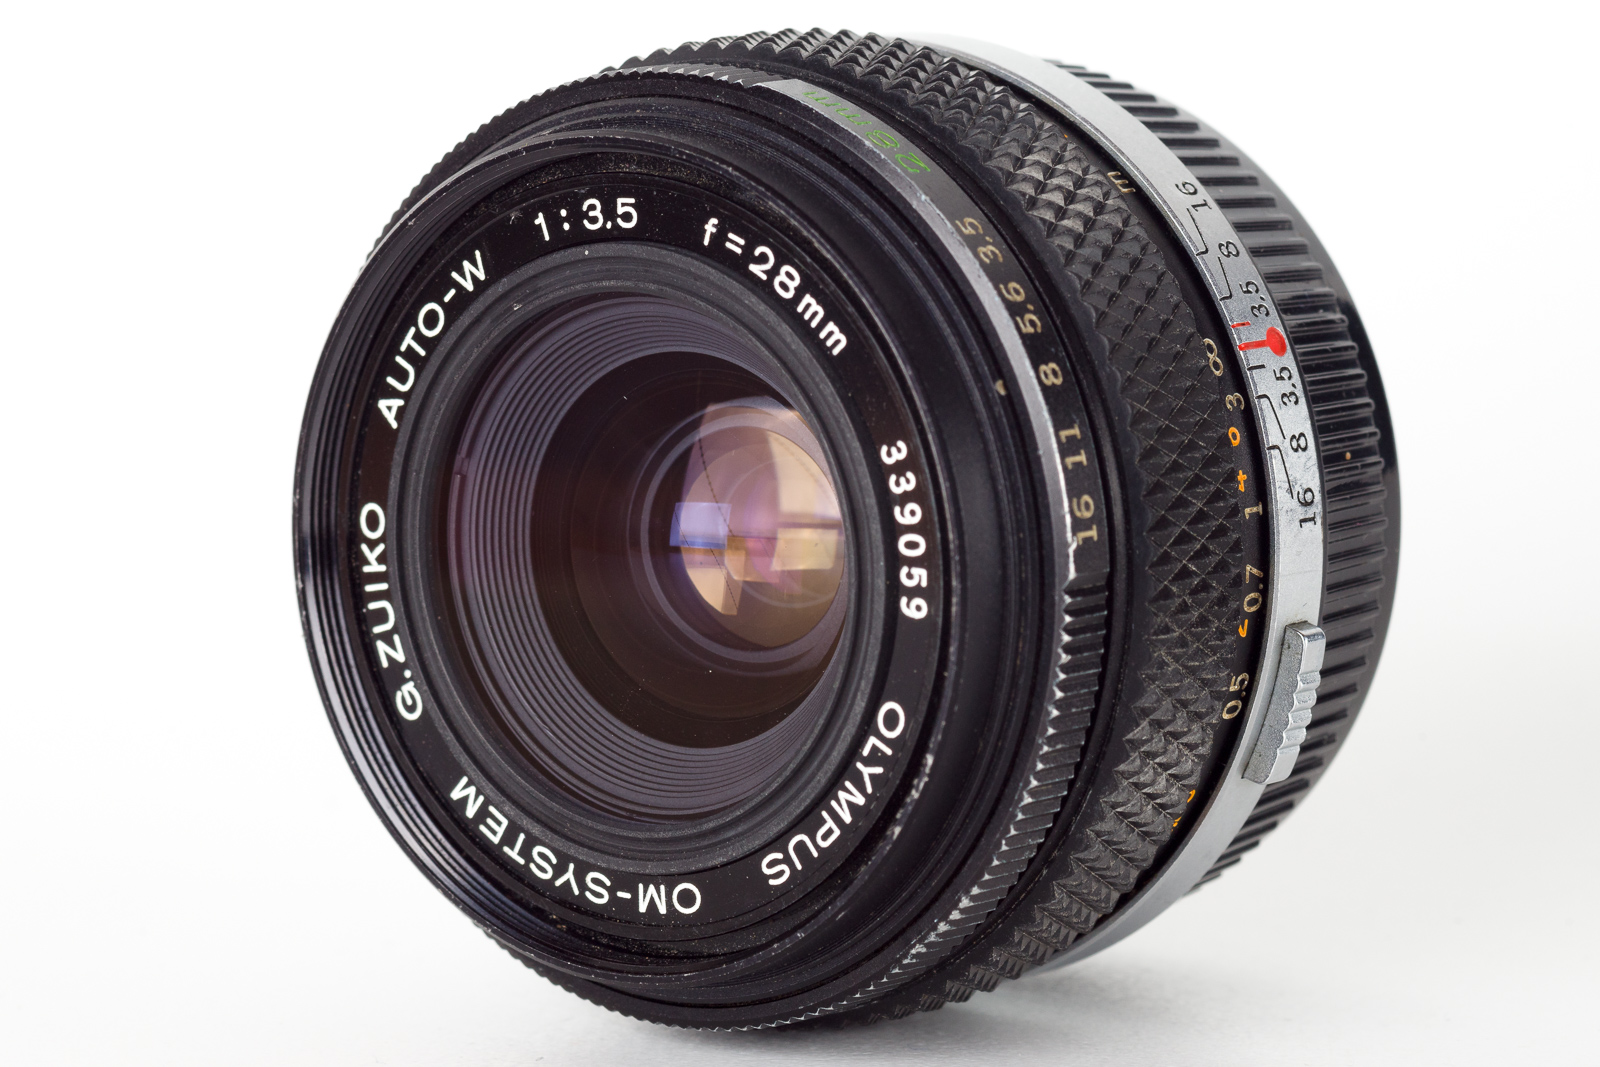 SMC Pentax 3.5/28 compared to other 28mm lenses – Ad Dieleman's blog